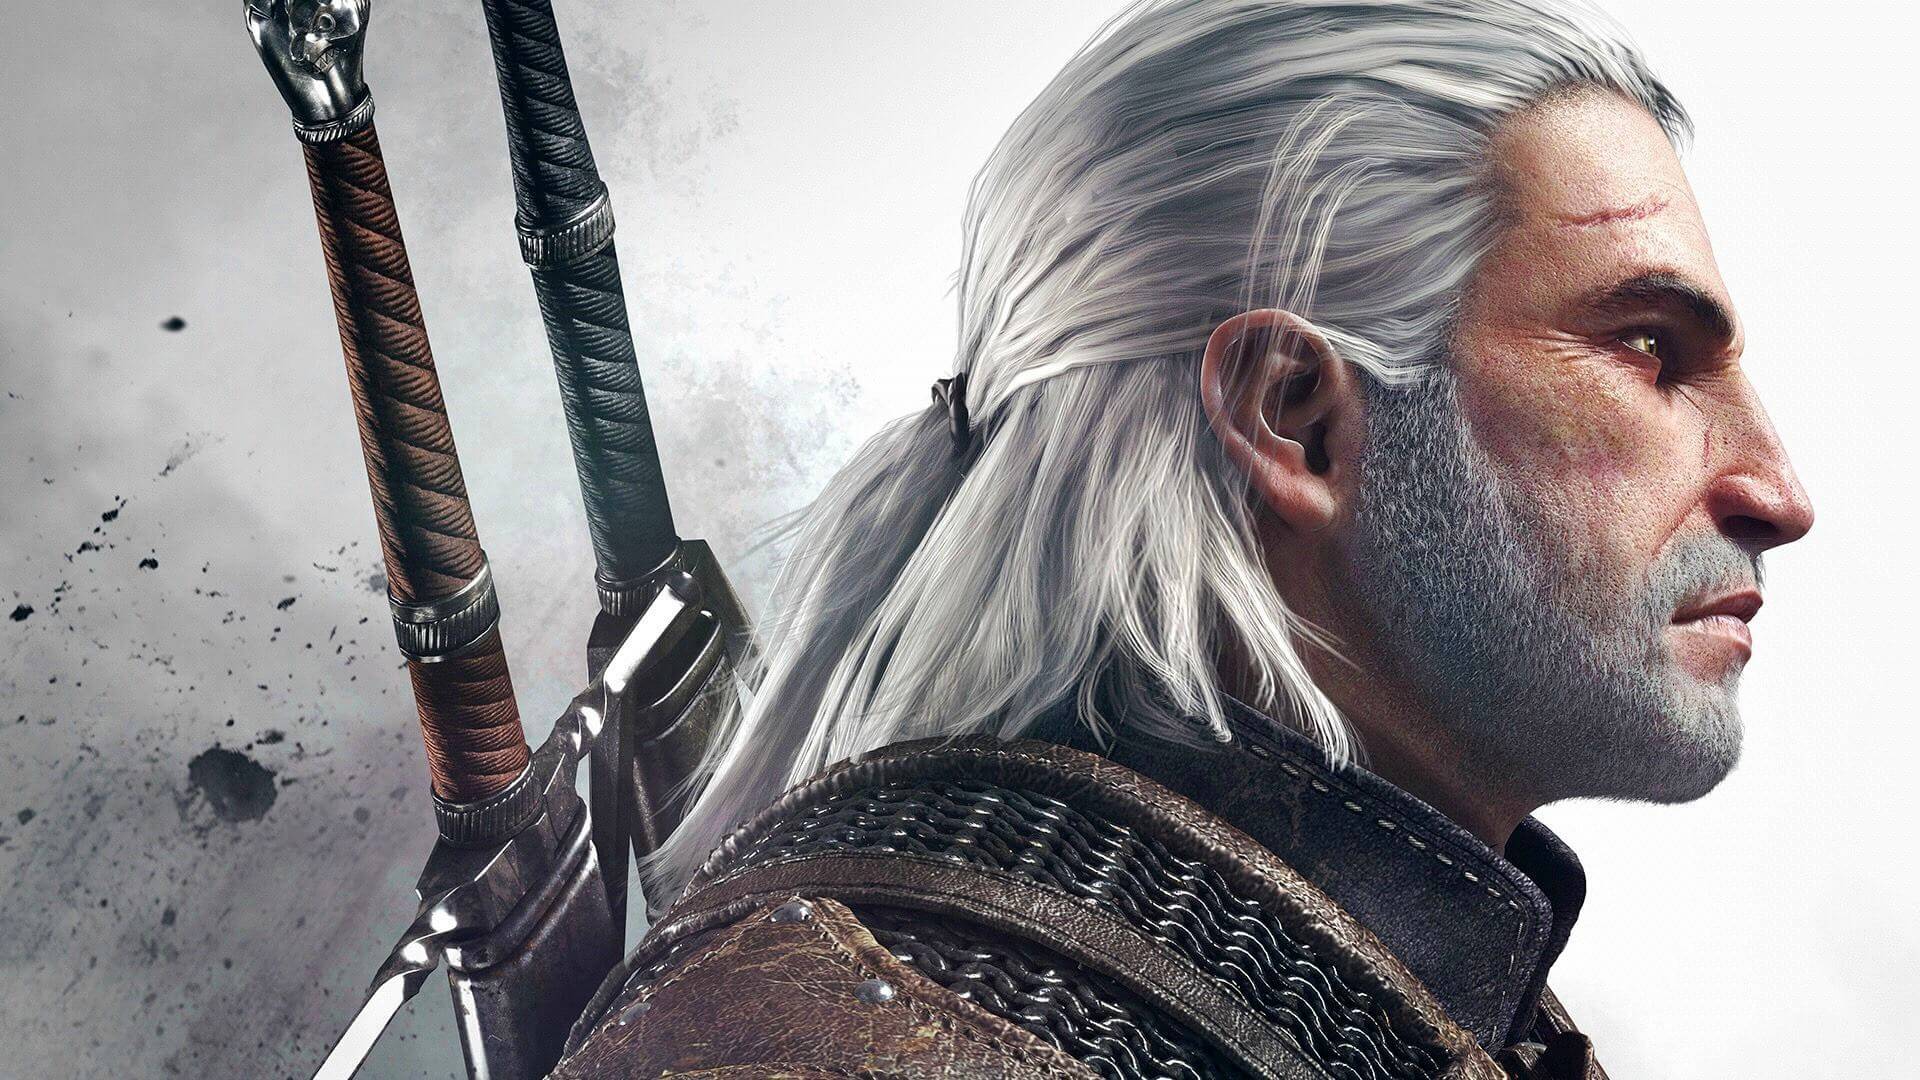 The Witcher showrunner promises the Netflix series will maintain its adult themes